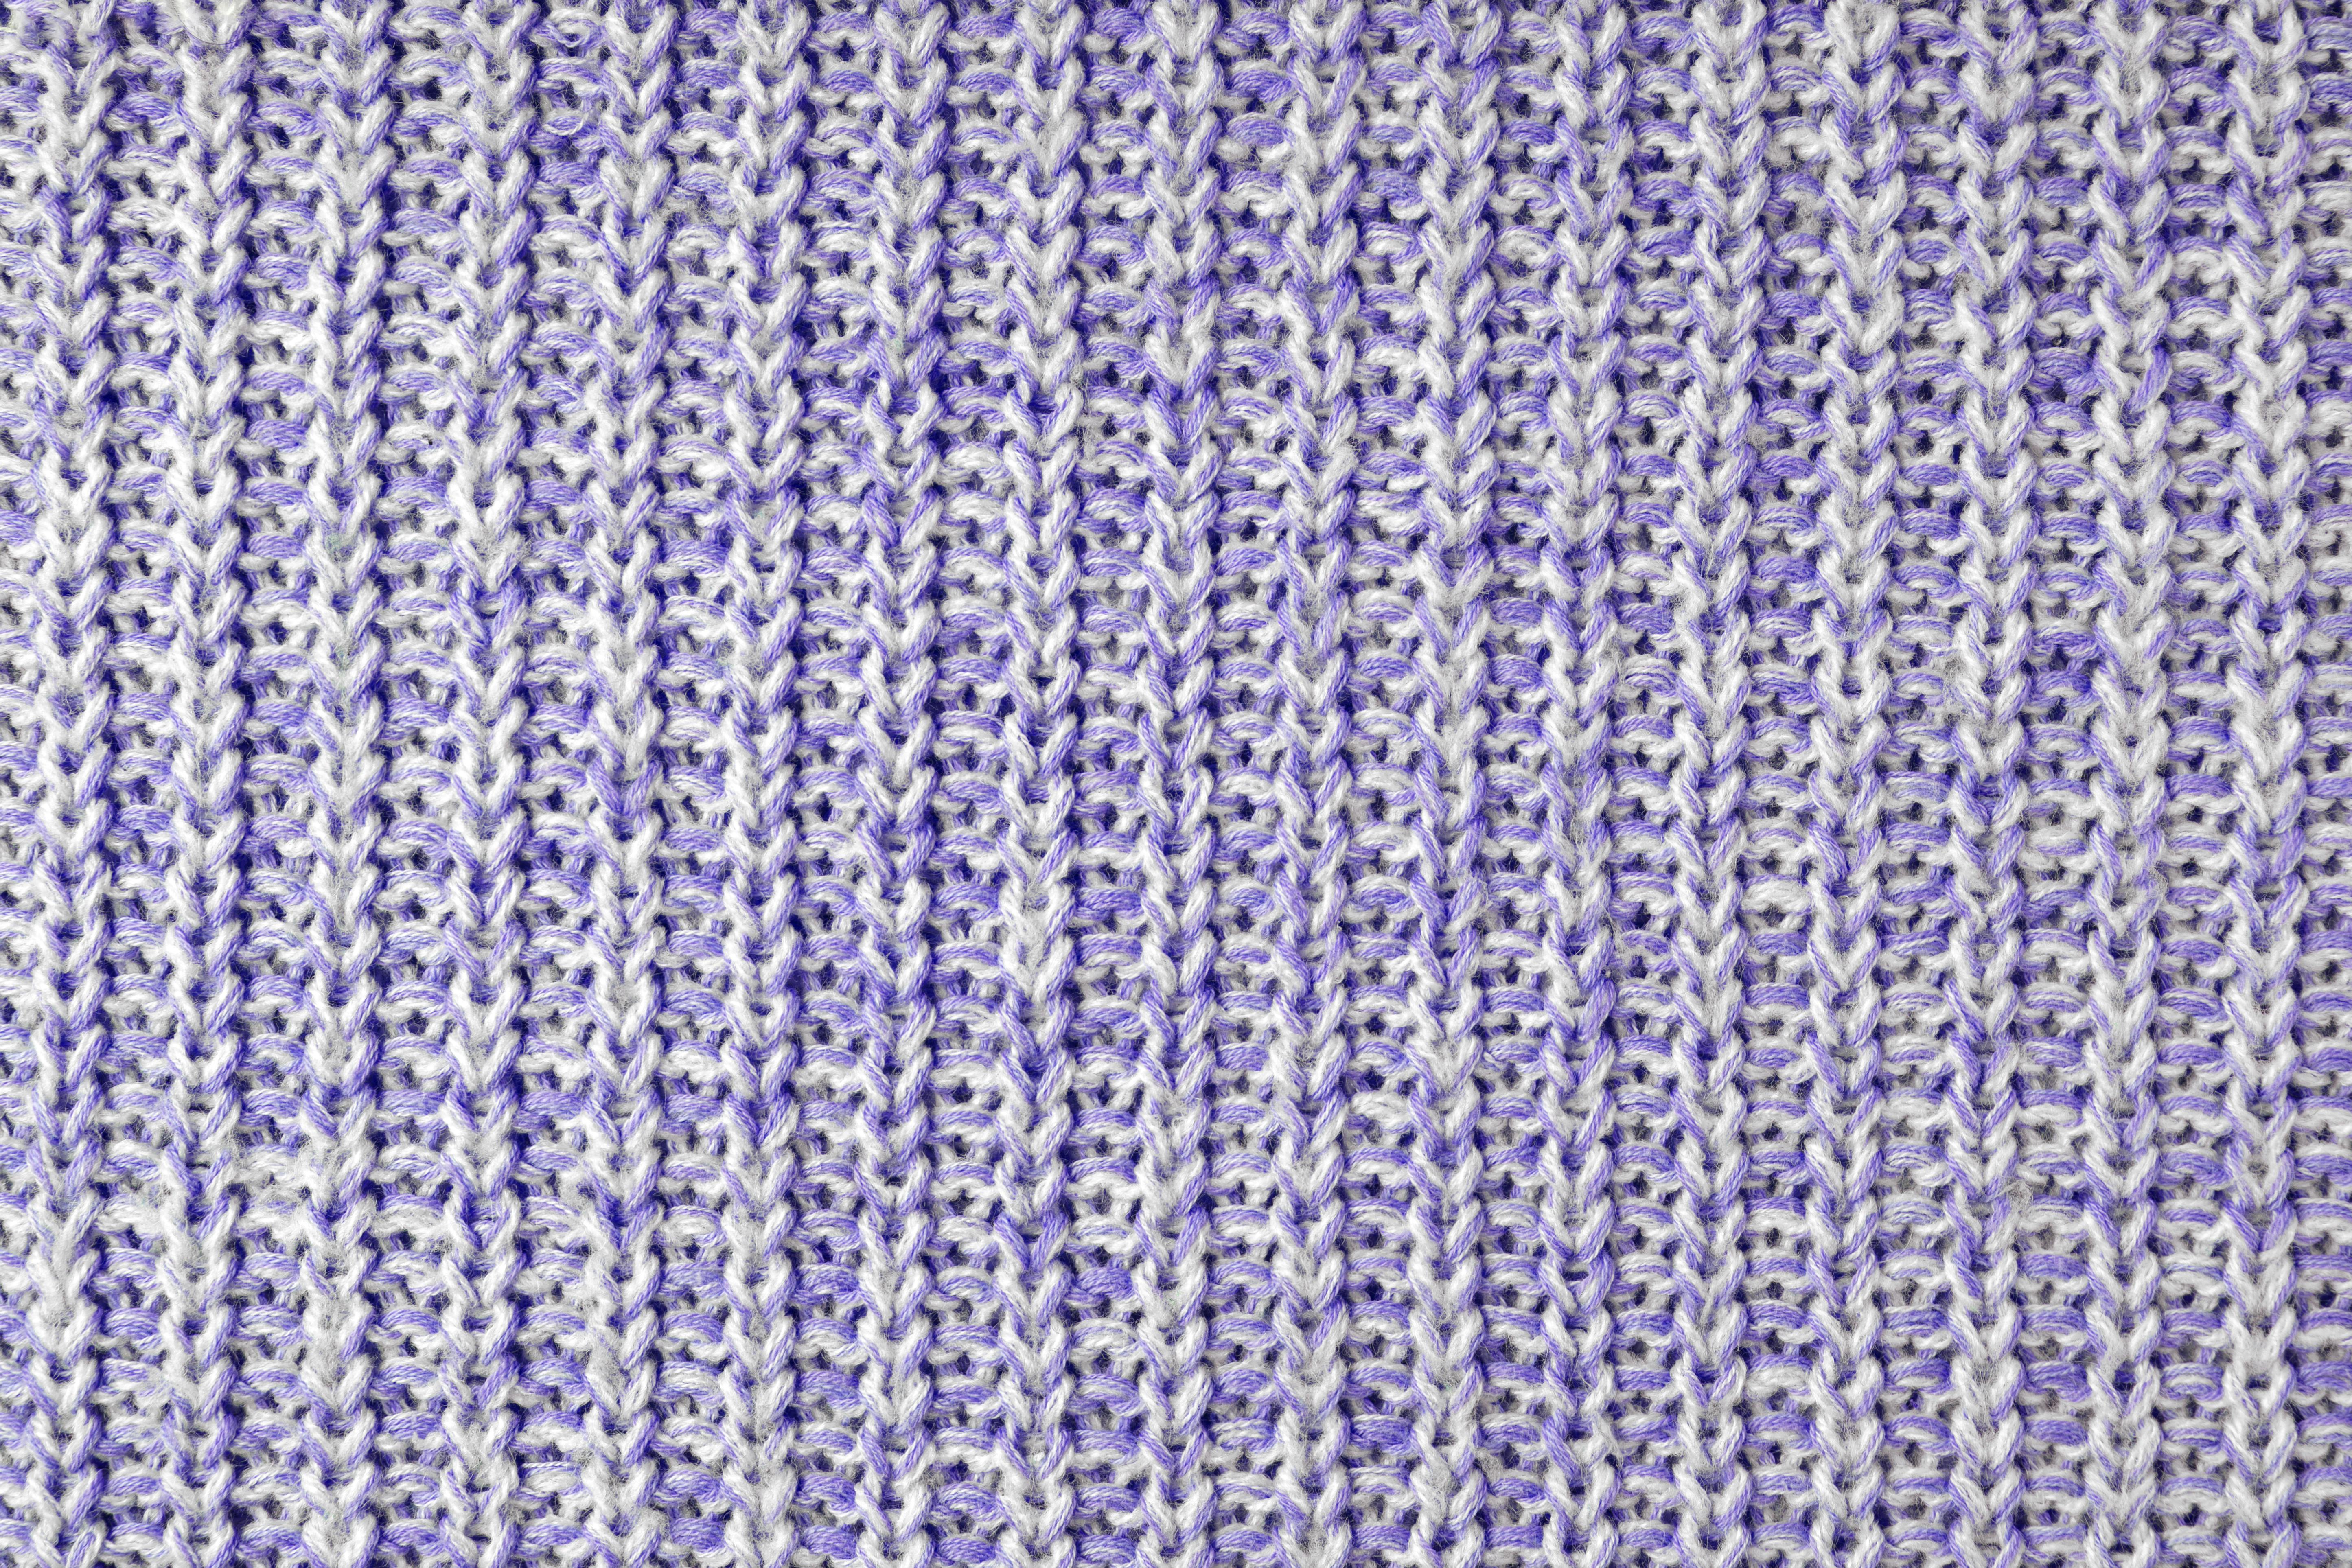  close up of knitted fabric in a purple and white melange pattern